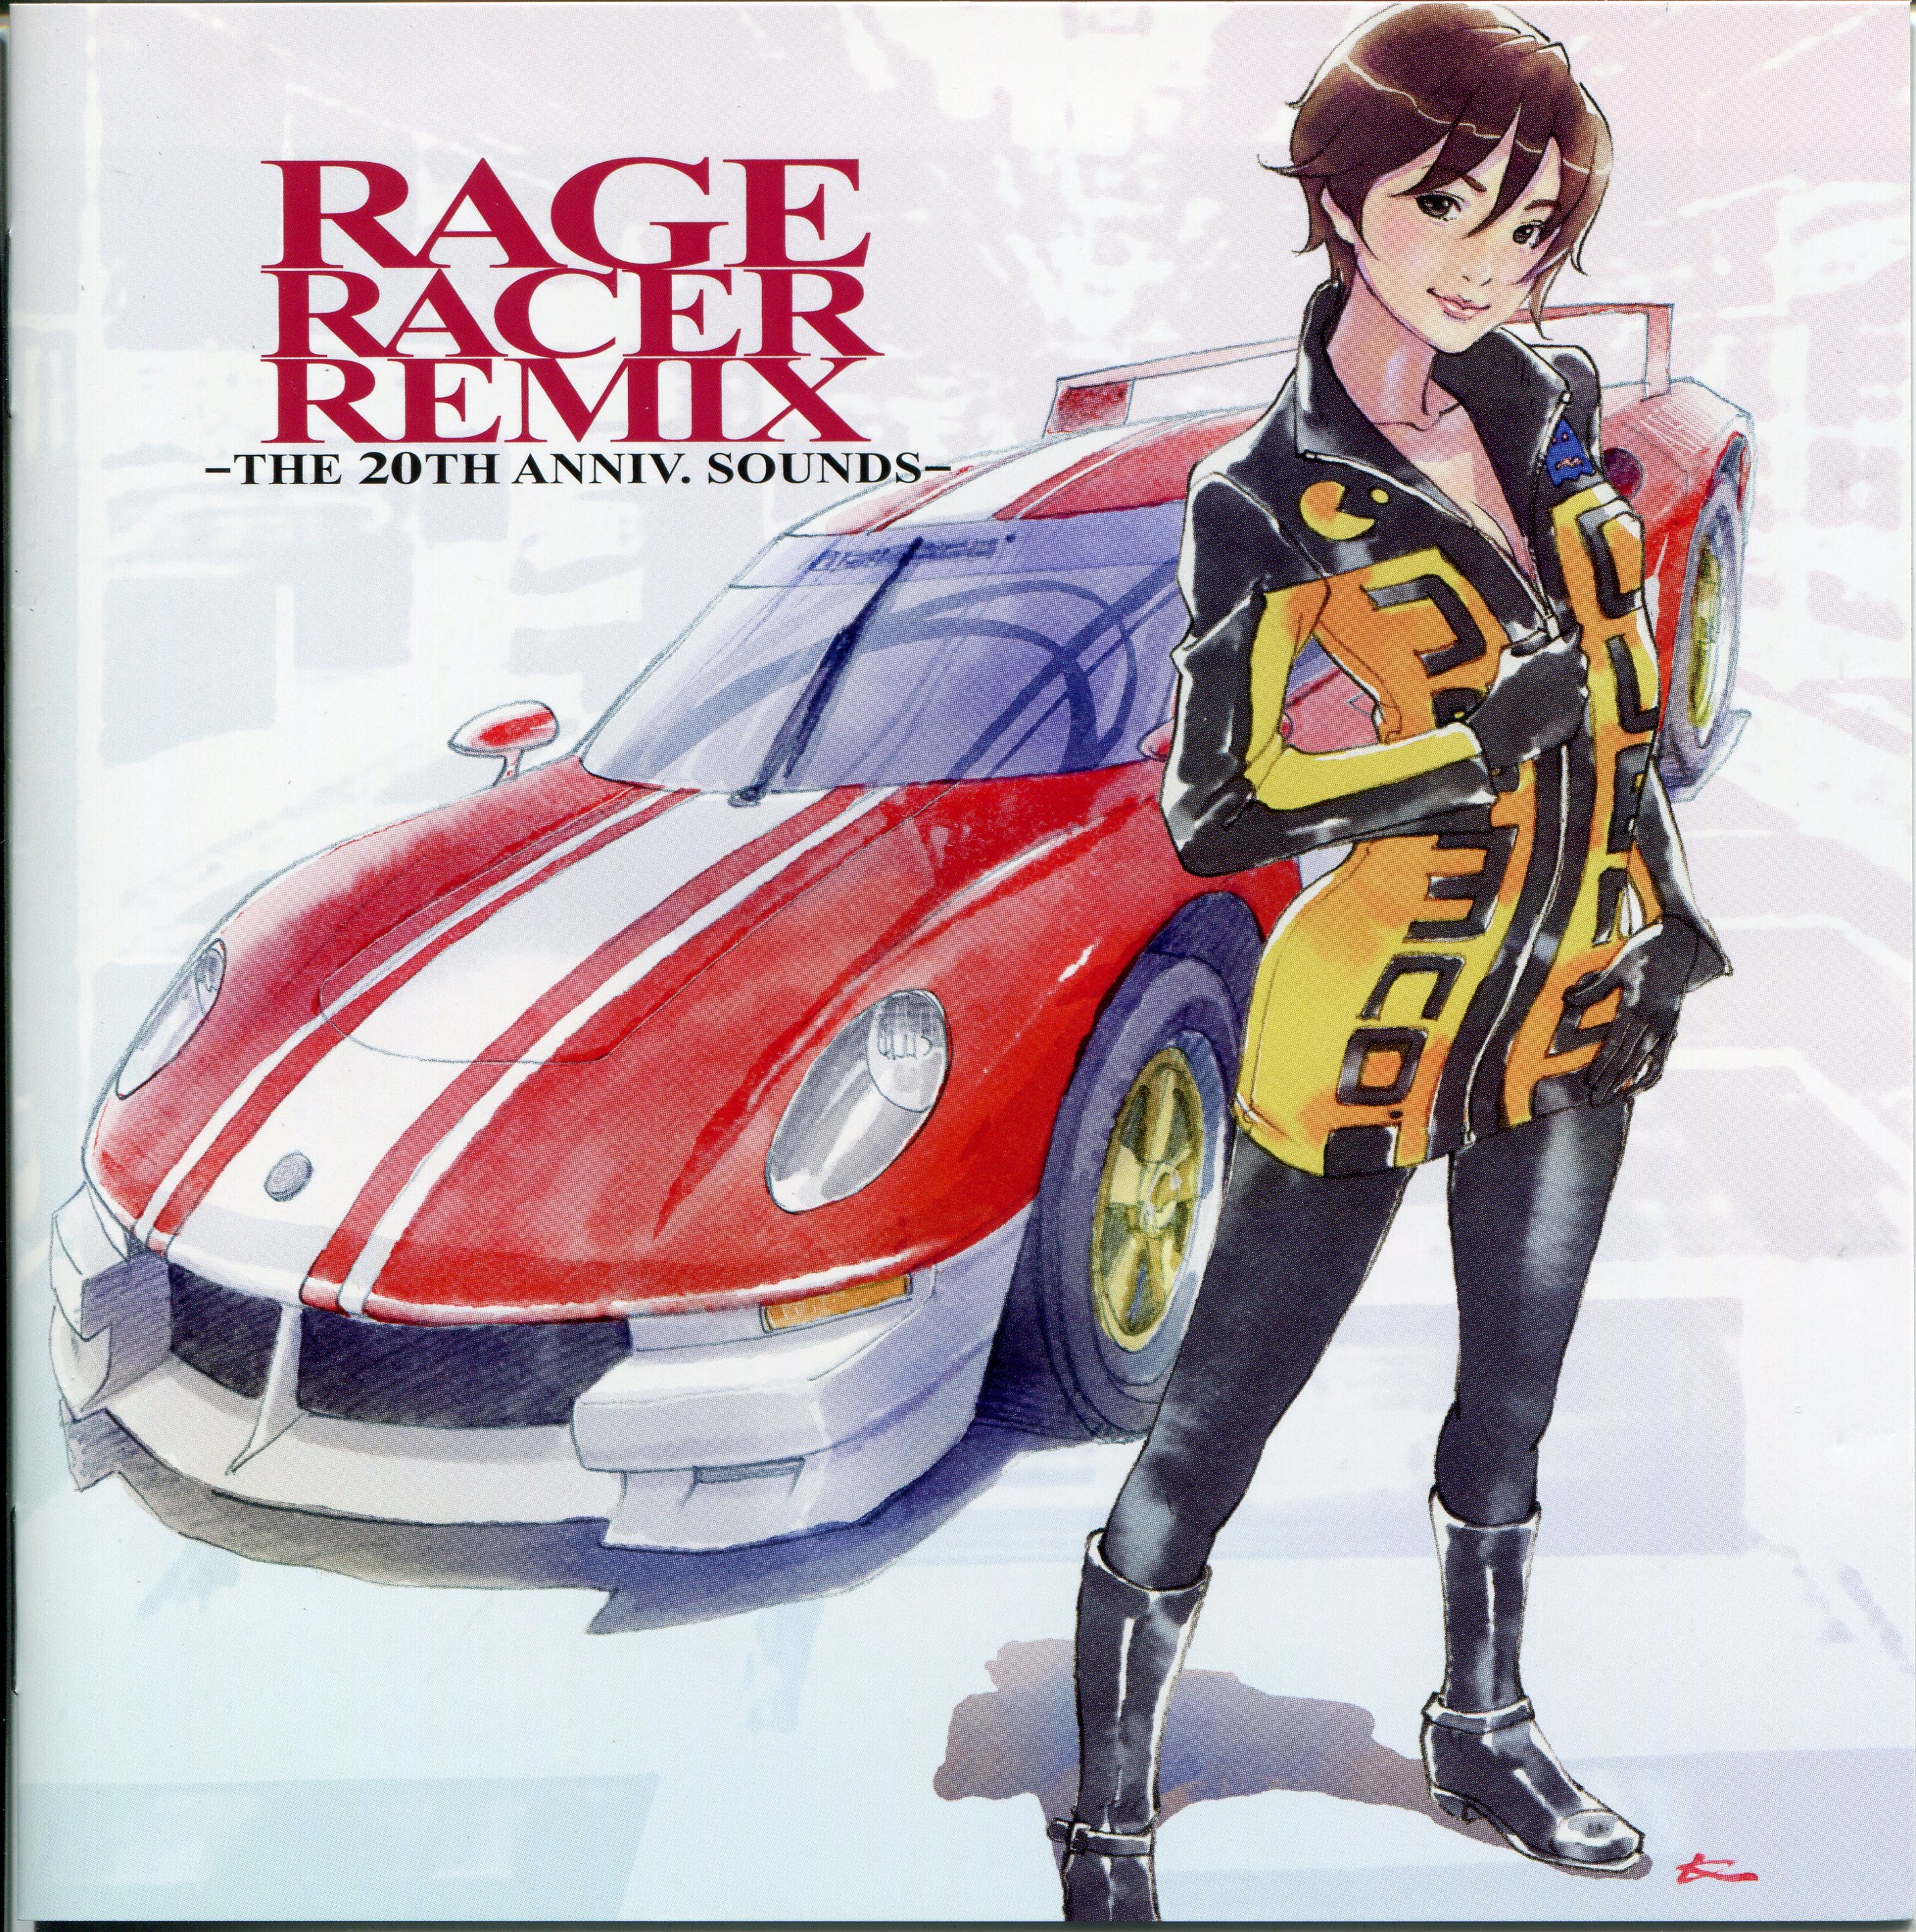 RAGE RACER REMIX -THE 20TH ANNIV. SOUNDS- + Extra Disc (2017) MP3 